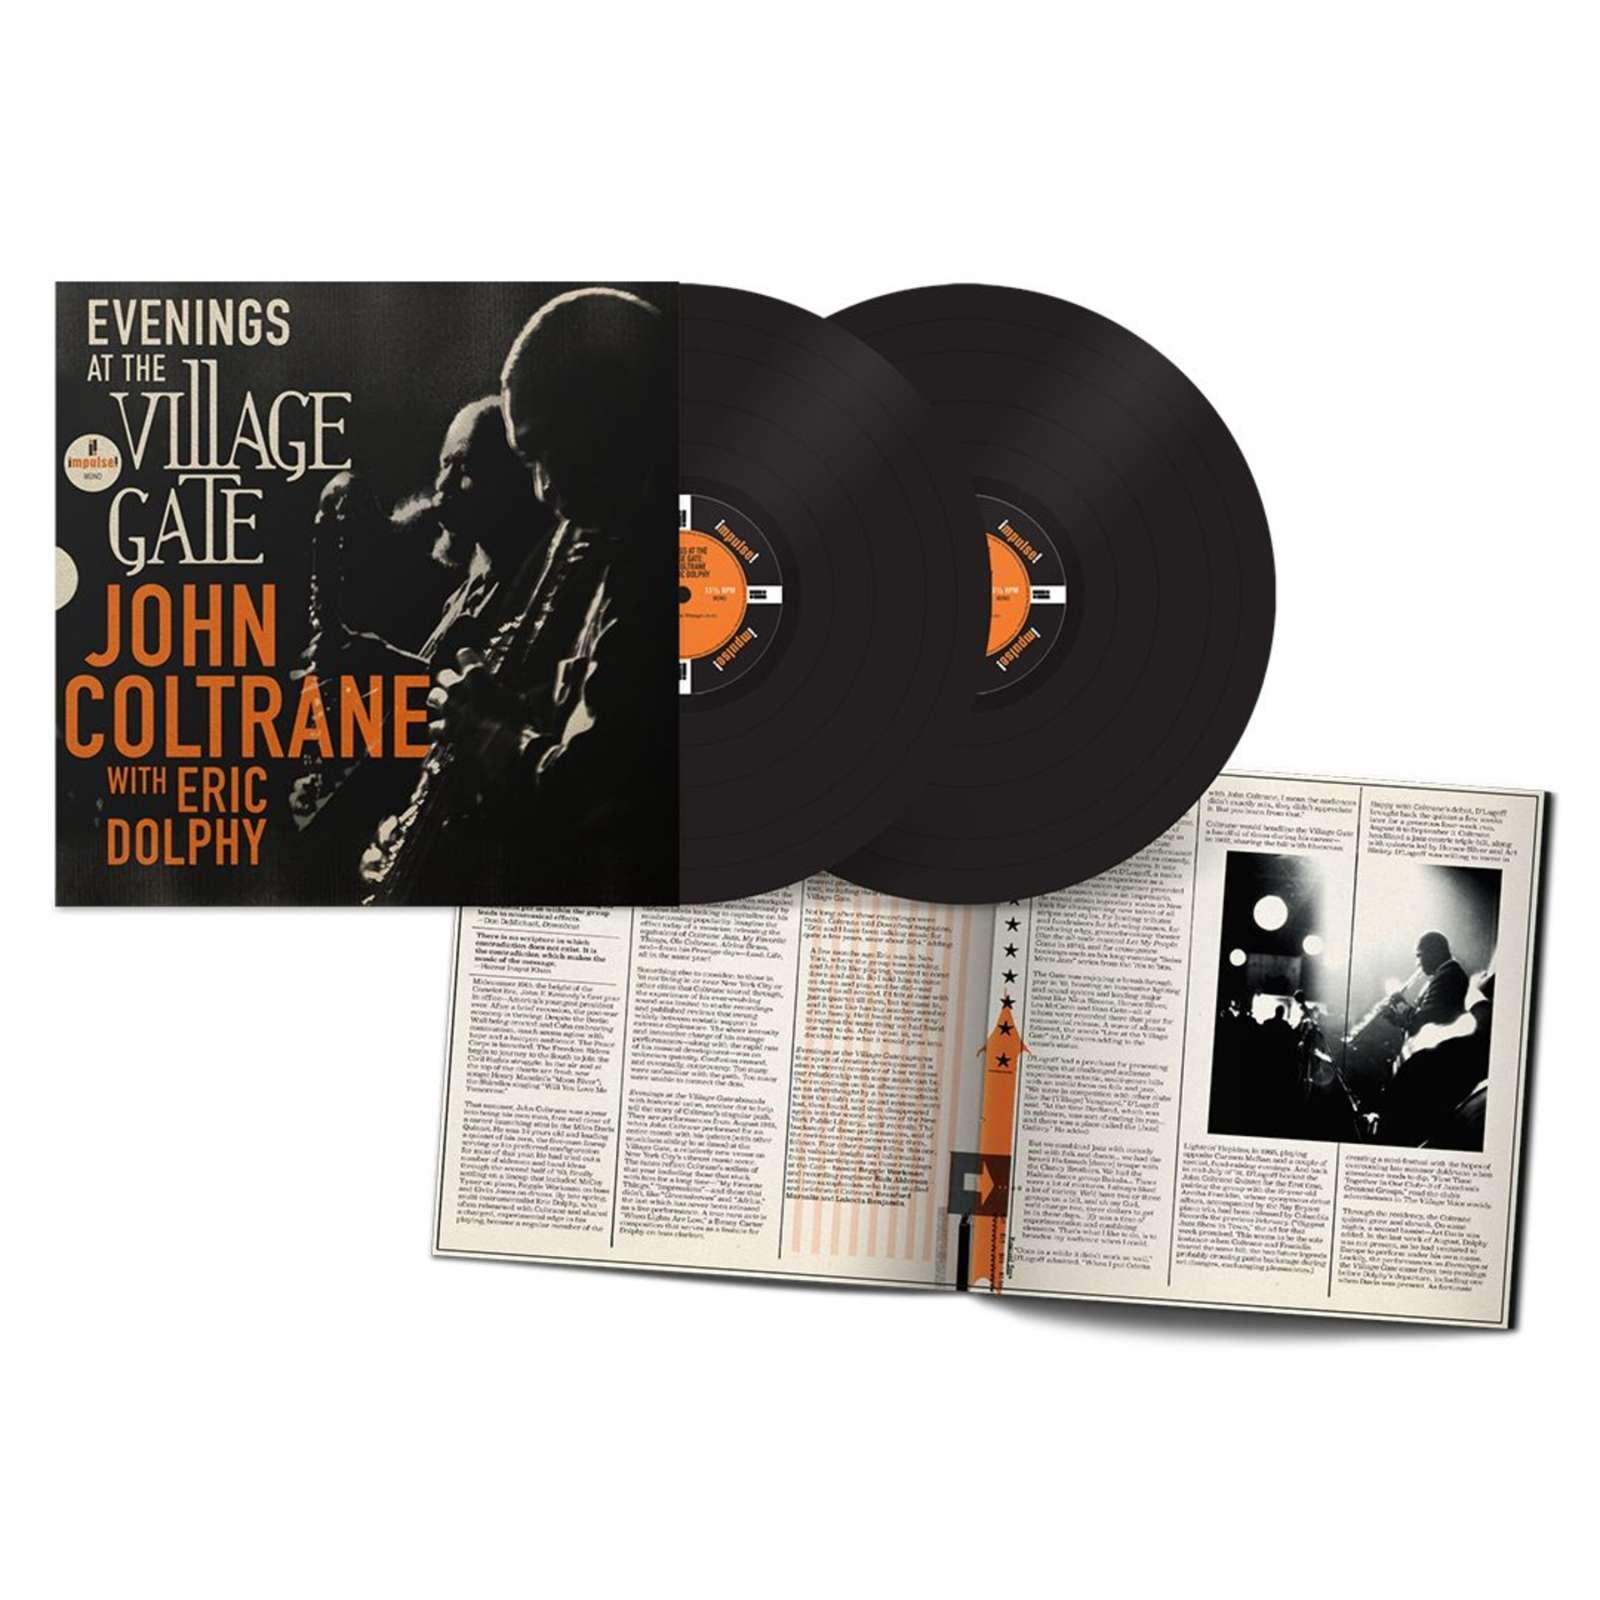 CD Shop - COLTRANE, JOHN EVENINGS AT THE VILLAGE GATE: JOHN COLTRANE WITH ERIC DOLPHY